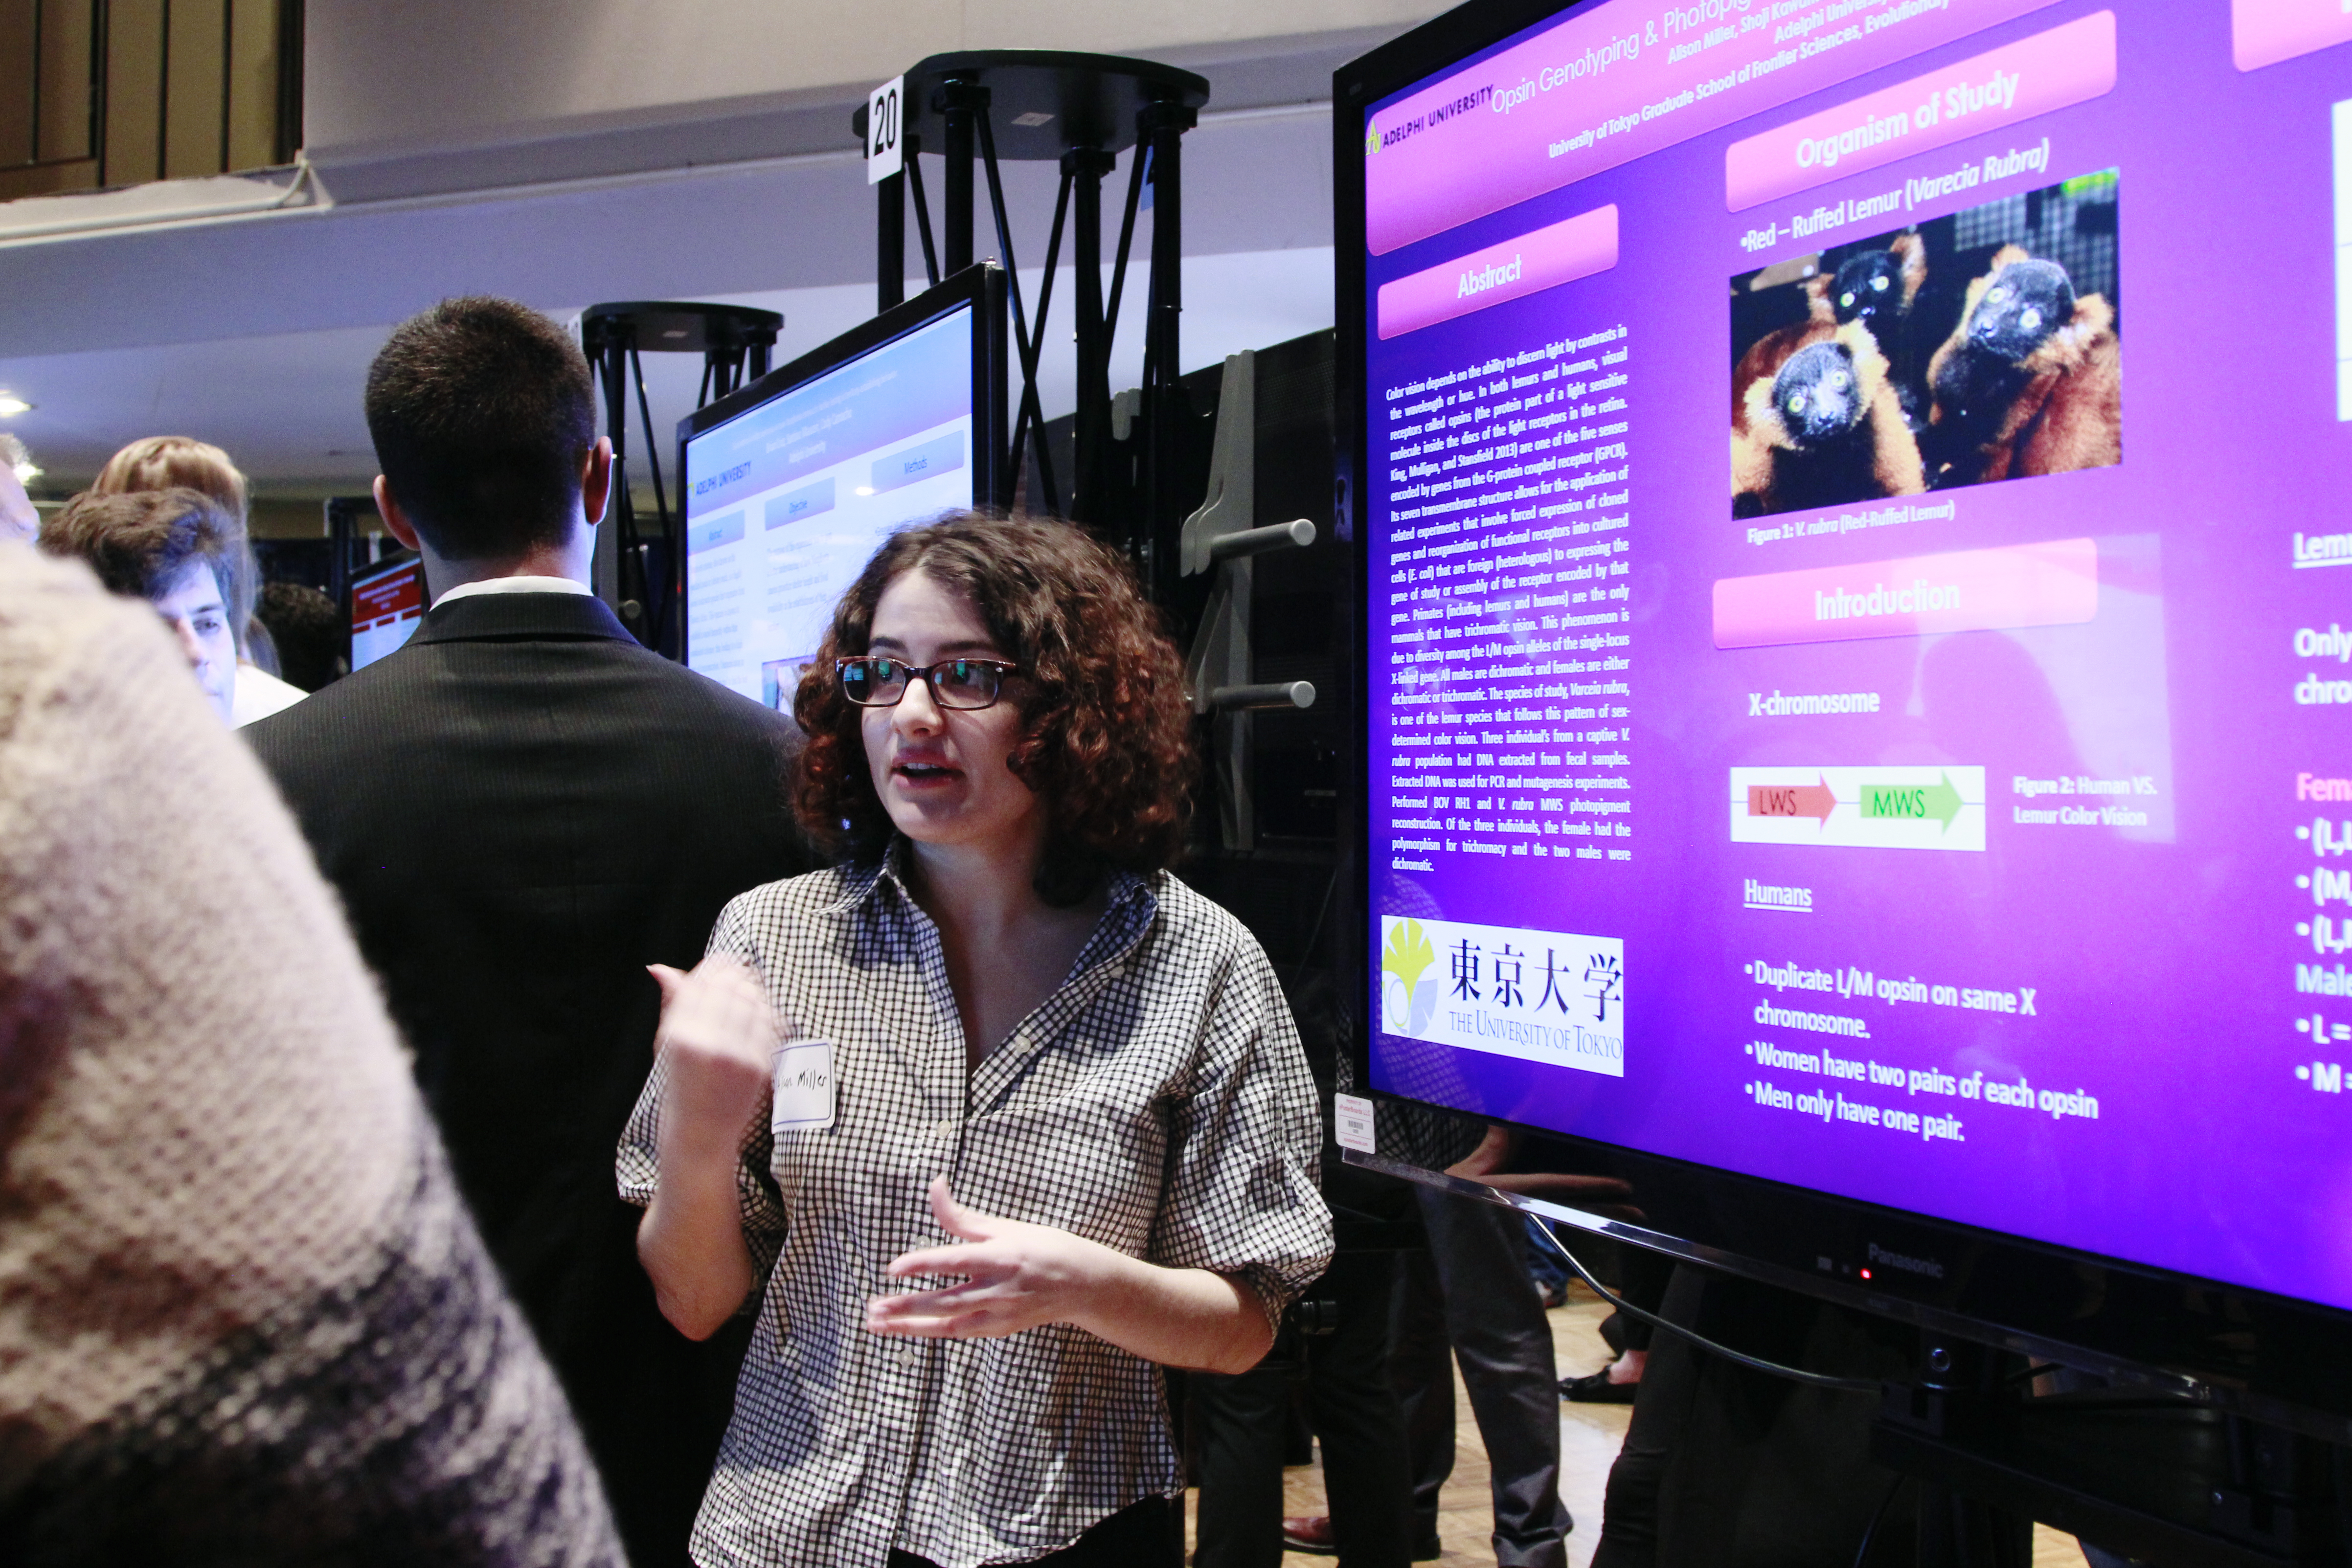 A student passionately explaining her research at Adelphi University's research conference